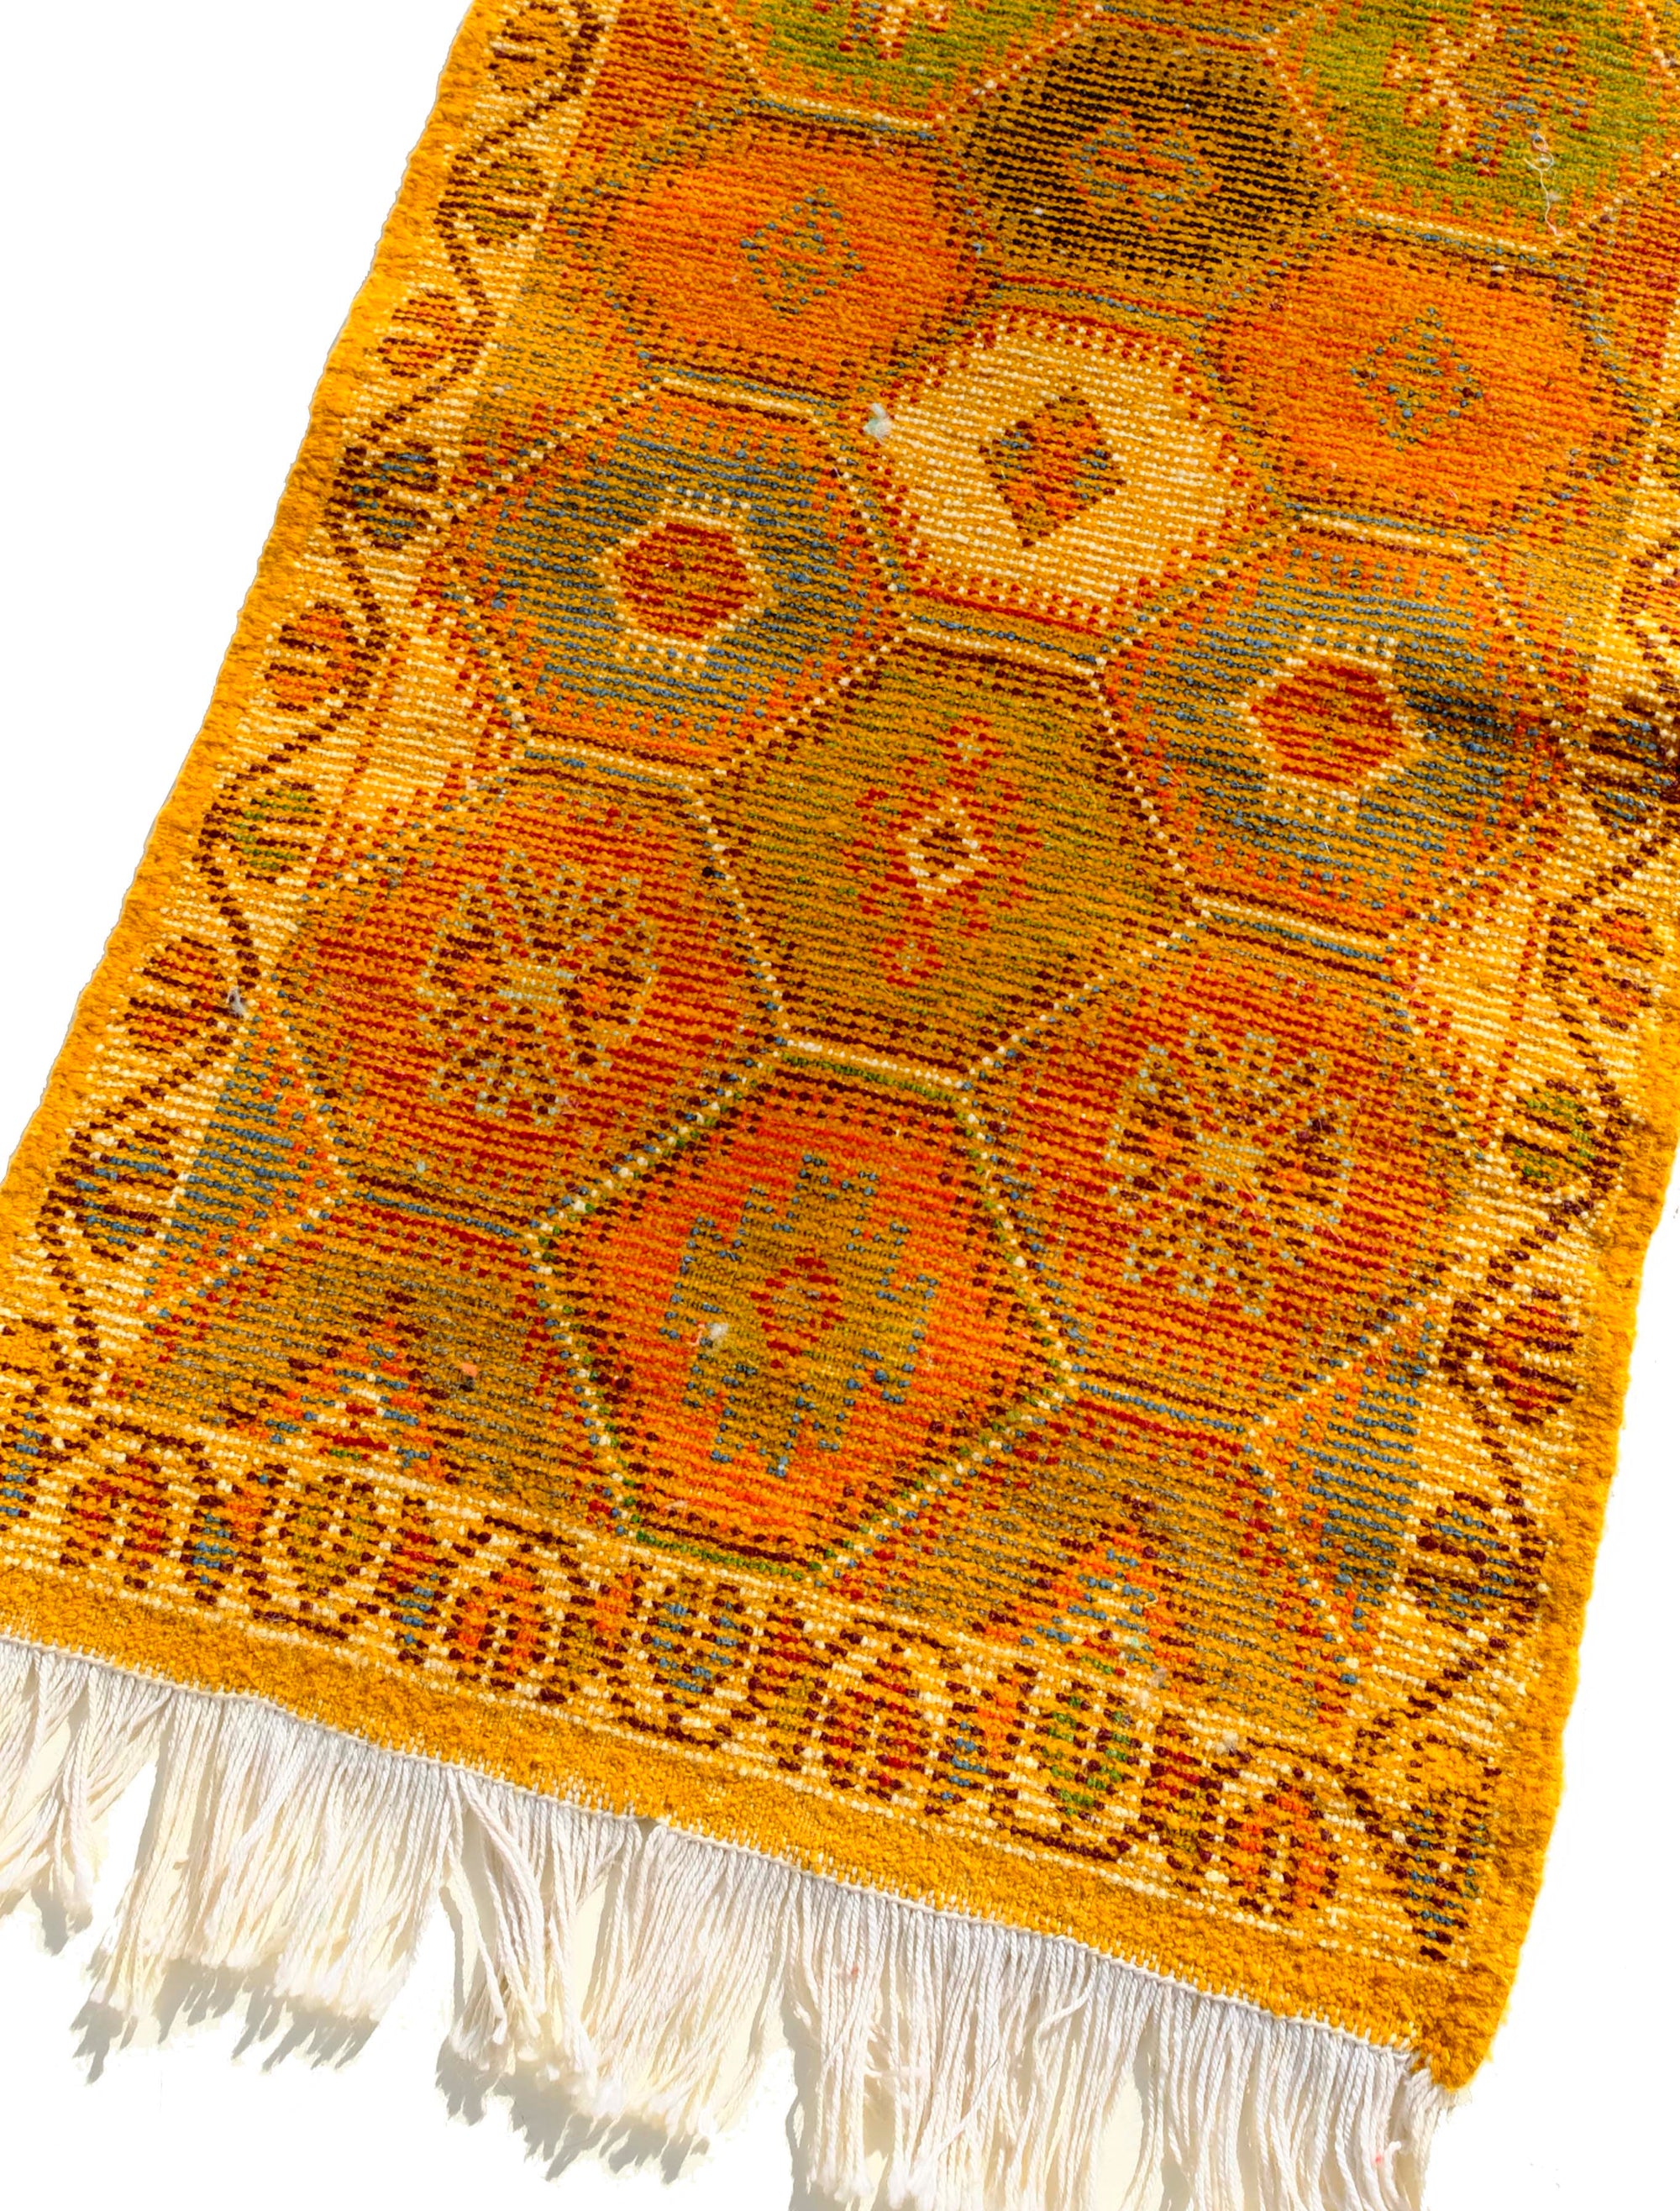 Elevate your space with the Nomad's Embrace Taznakht Rug. This Moroccan-inspired masterpiece boasts a multicolor hexagon pattern, intricately piled up for a textured finish. Traditional yet contemporary, it adds warmth to any room. Bring cultural heritage to your home with this uniquely crafted Taznakht rug.